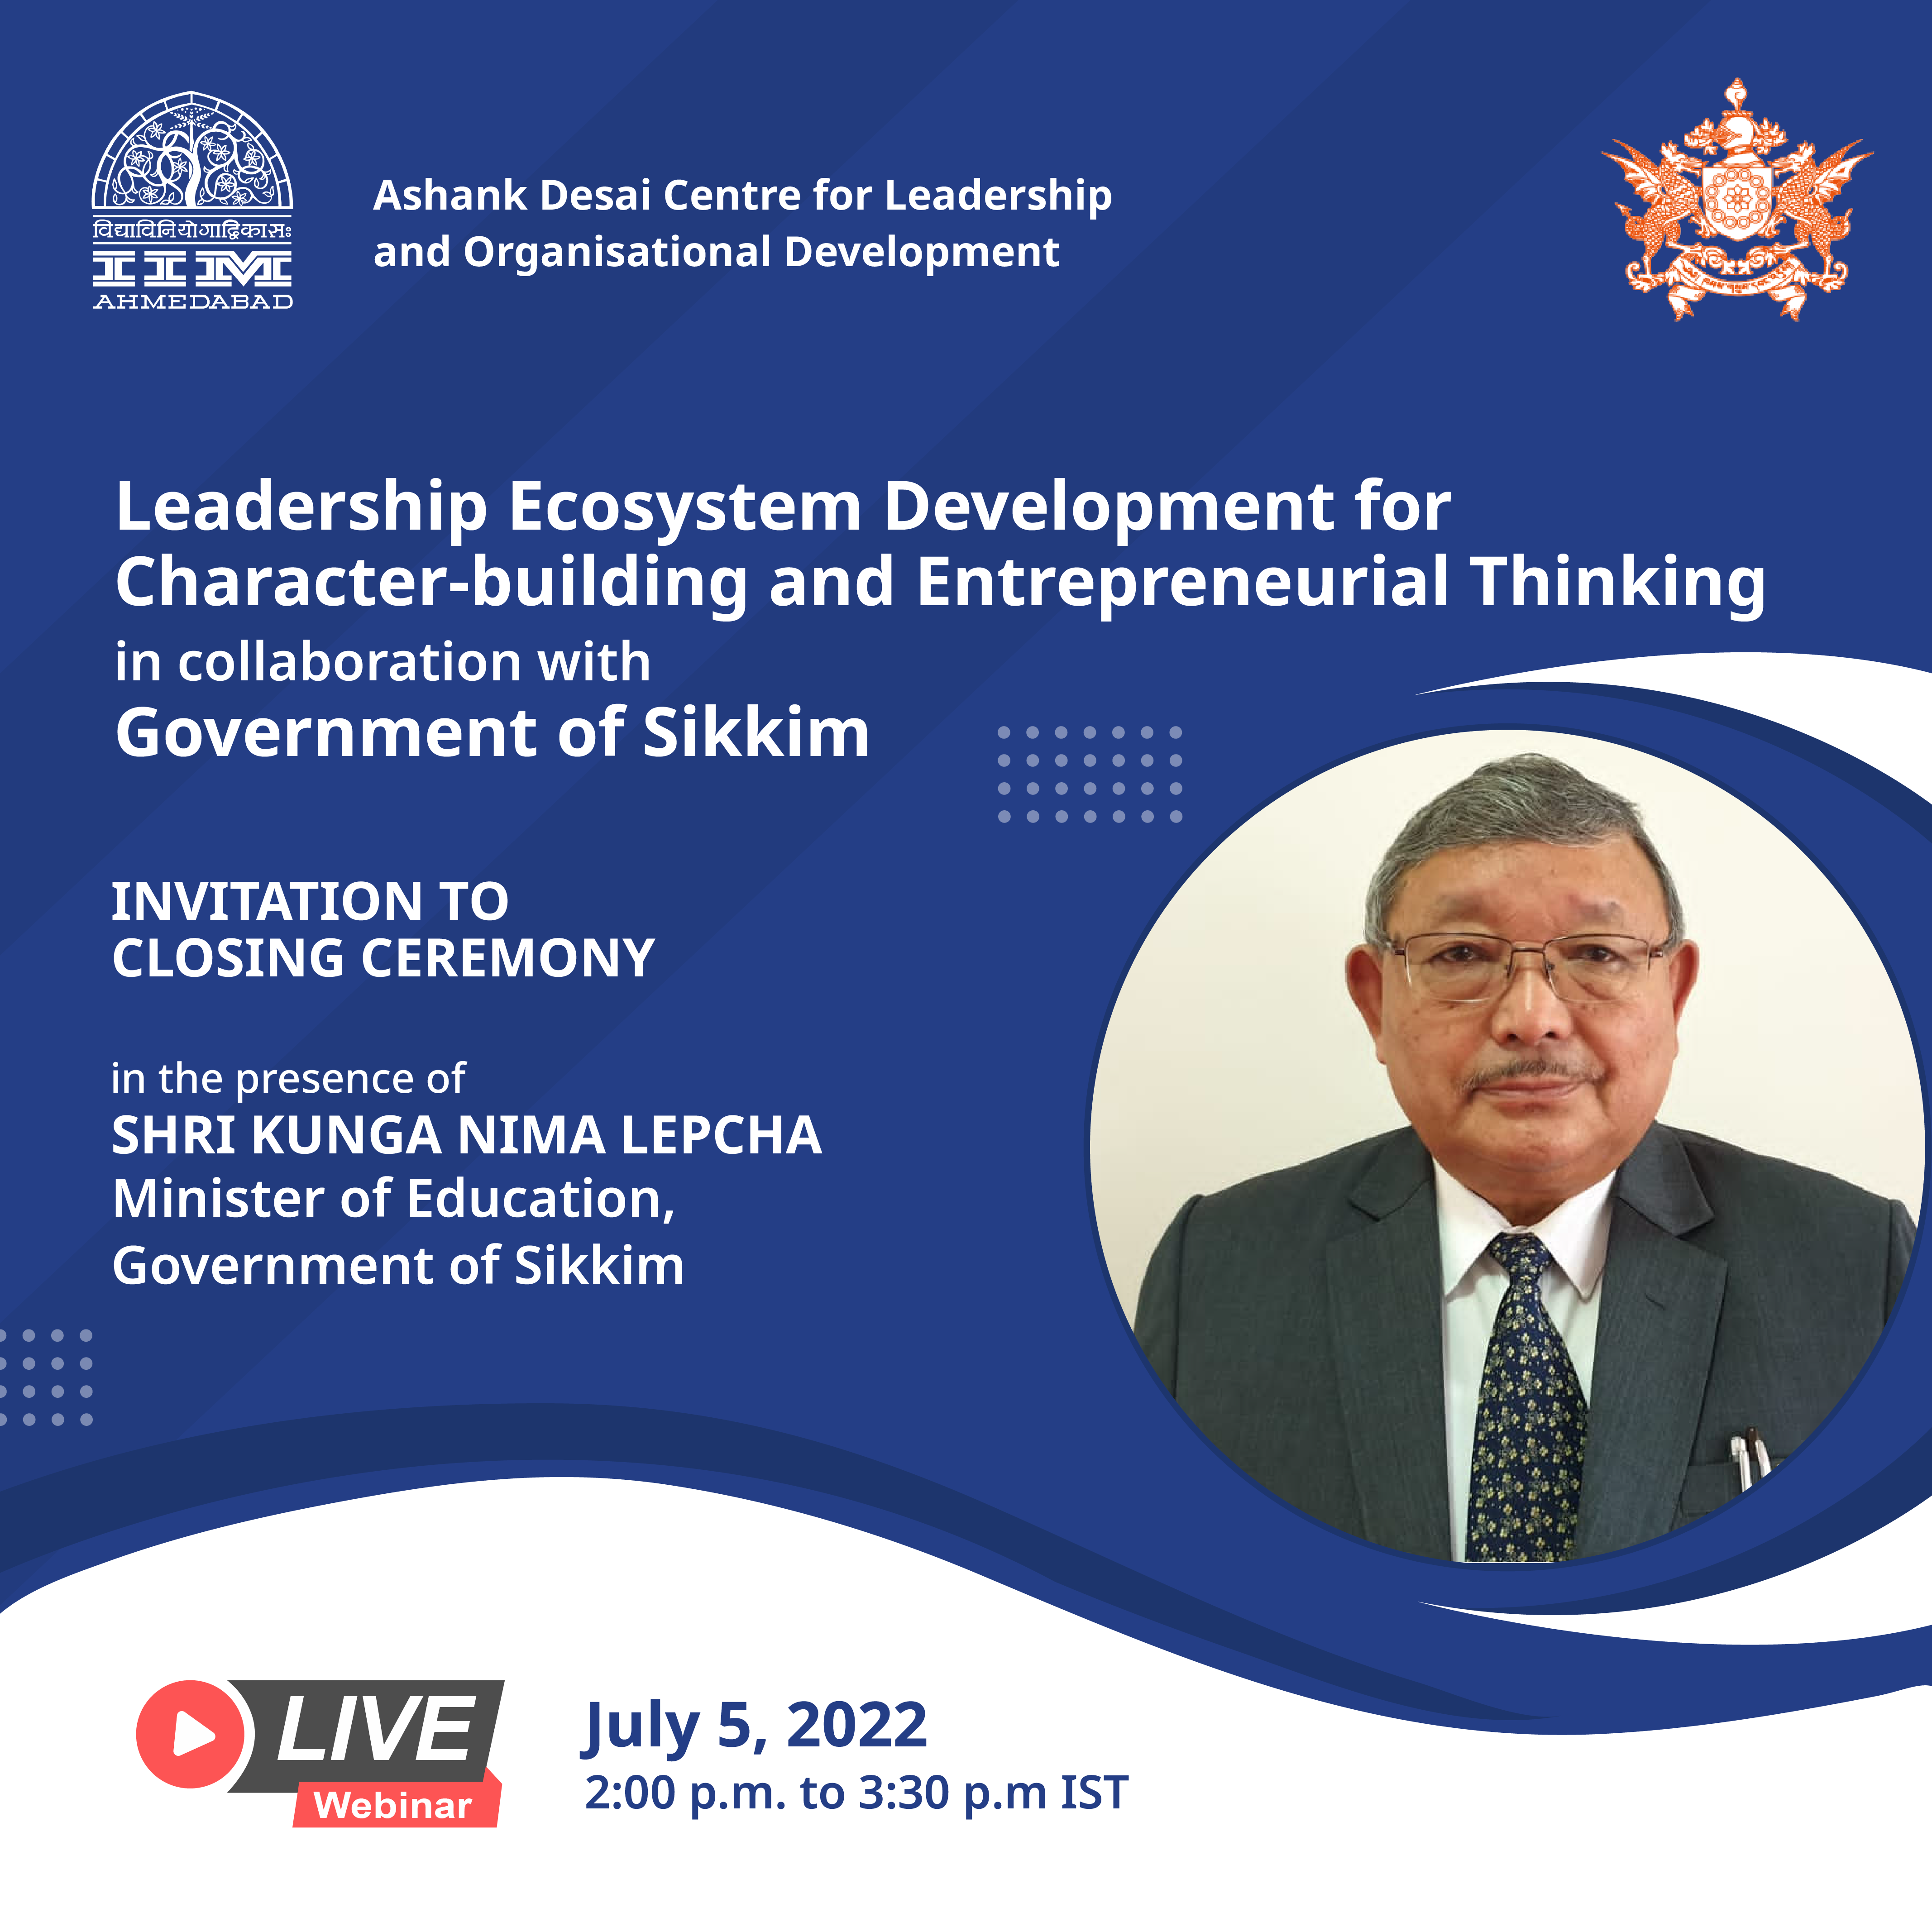 “Invitation to Closing Ceremony of the Leadership Ecosystem Development for Character-building and Entrepreneurial Thinking”